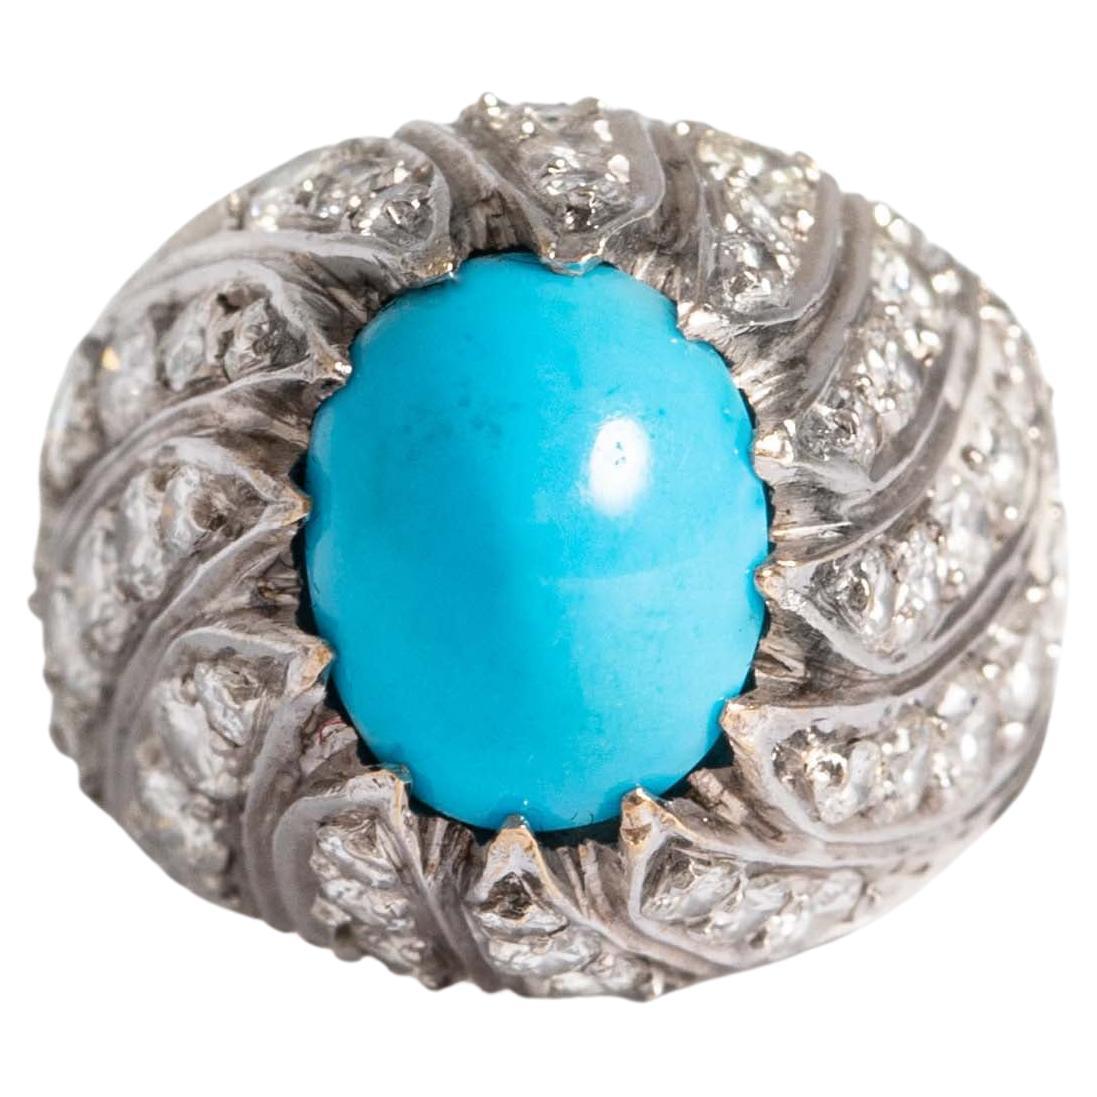 18K white gold ring set with round-cut diamonds and centered by a cabochon-cut turquoise (not tested).
Gross weight: 6.57 grams.